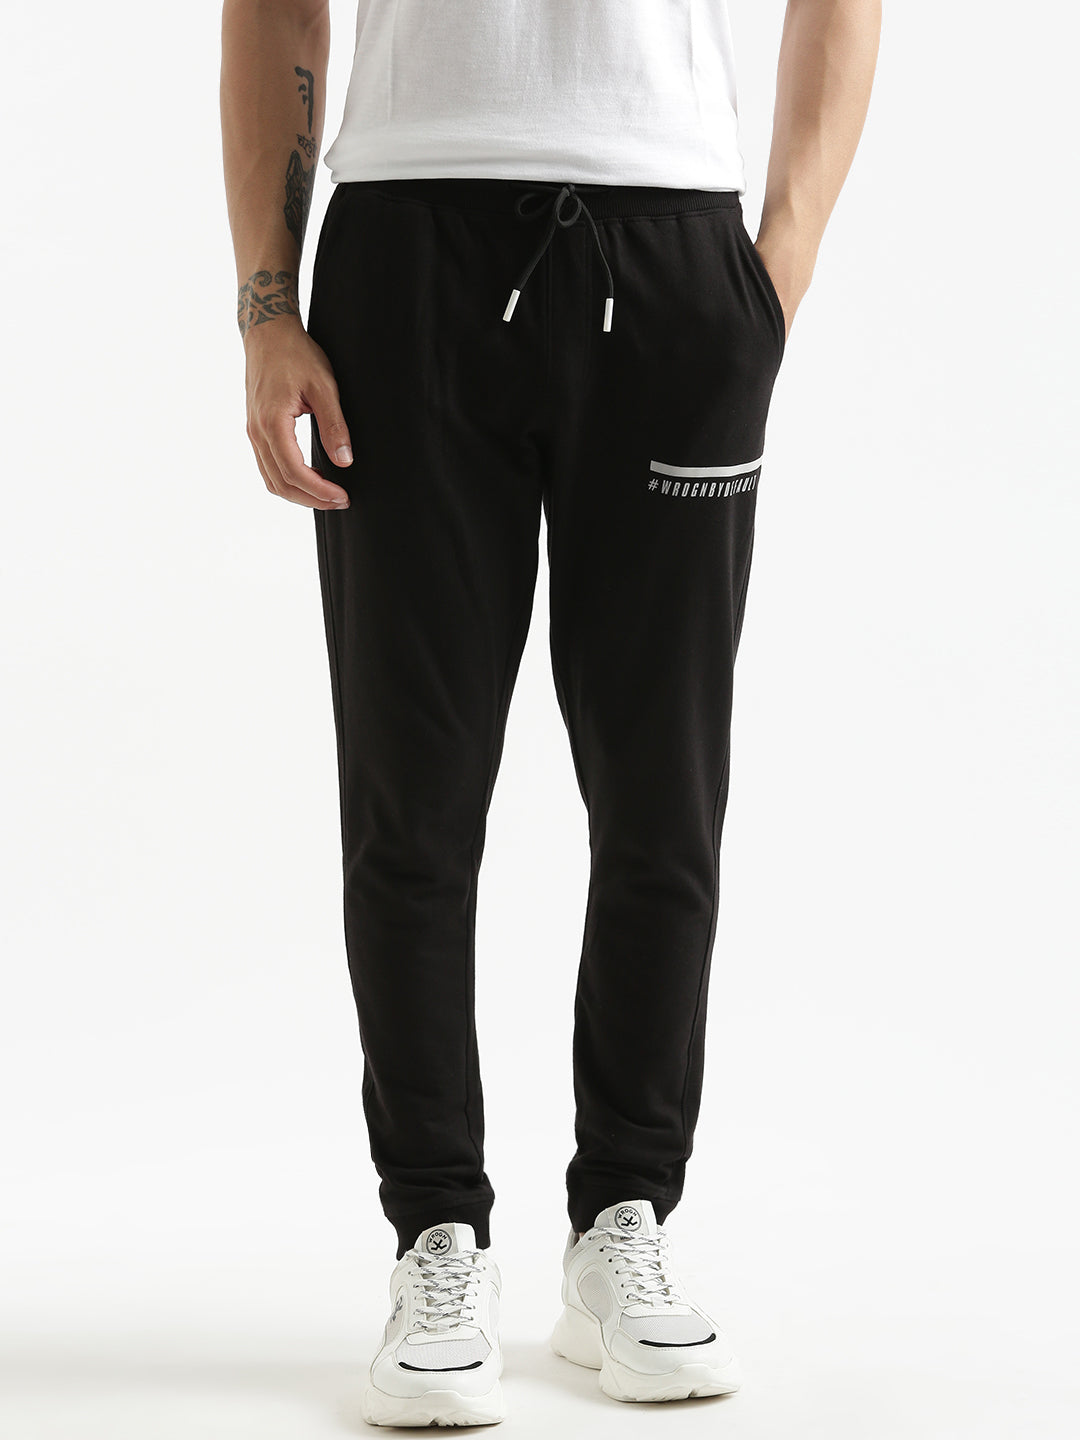 Wrogn By Default Printed Jogger